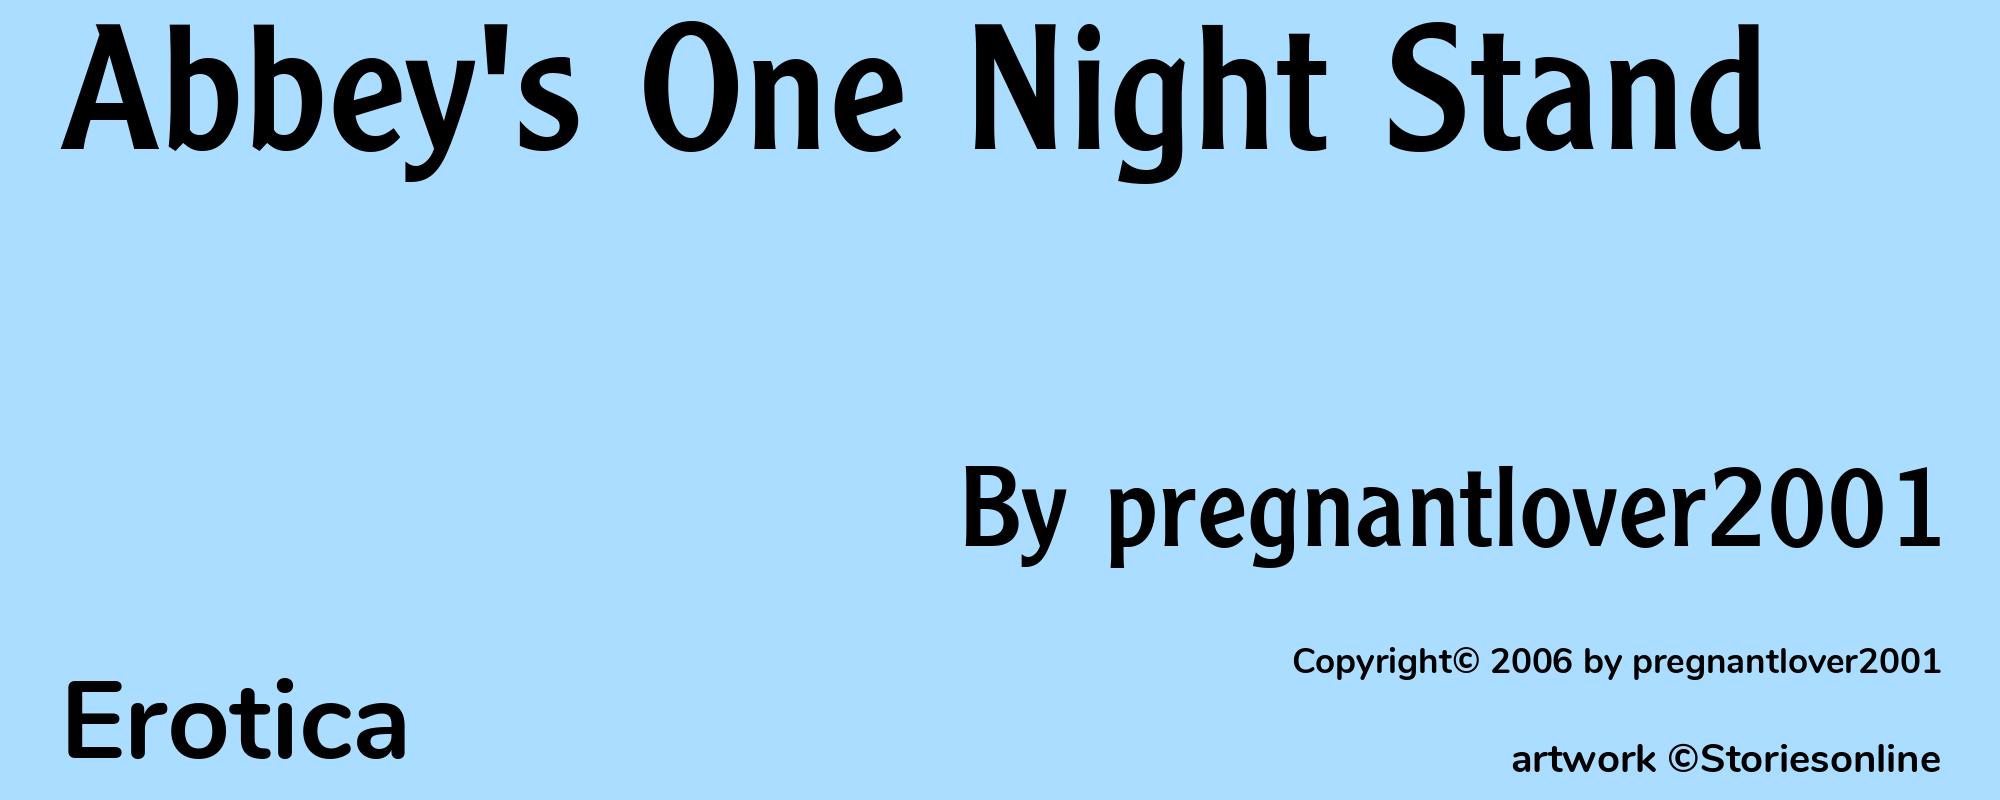 Abbey's One Night Stand - Cover